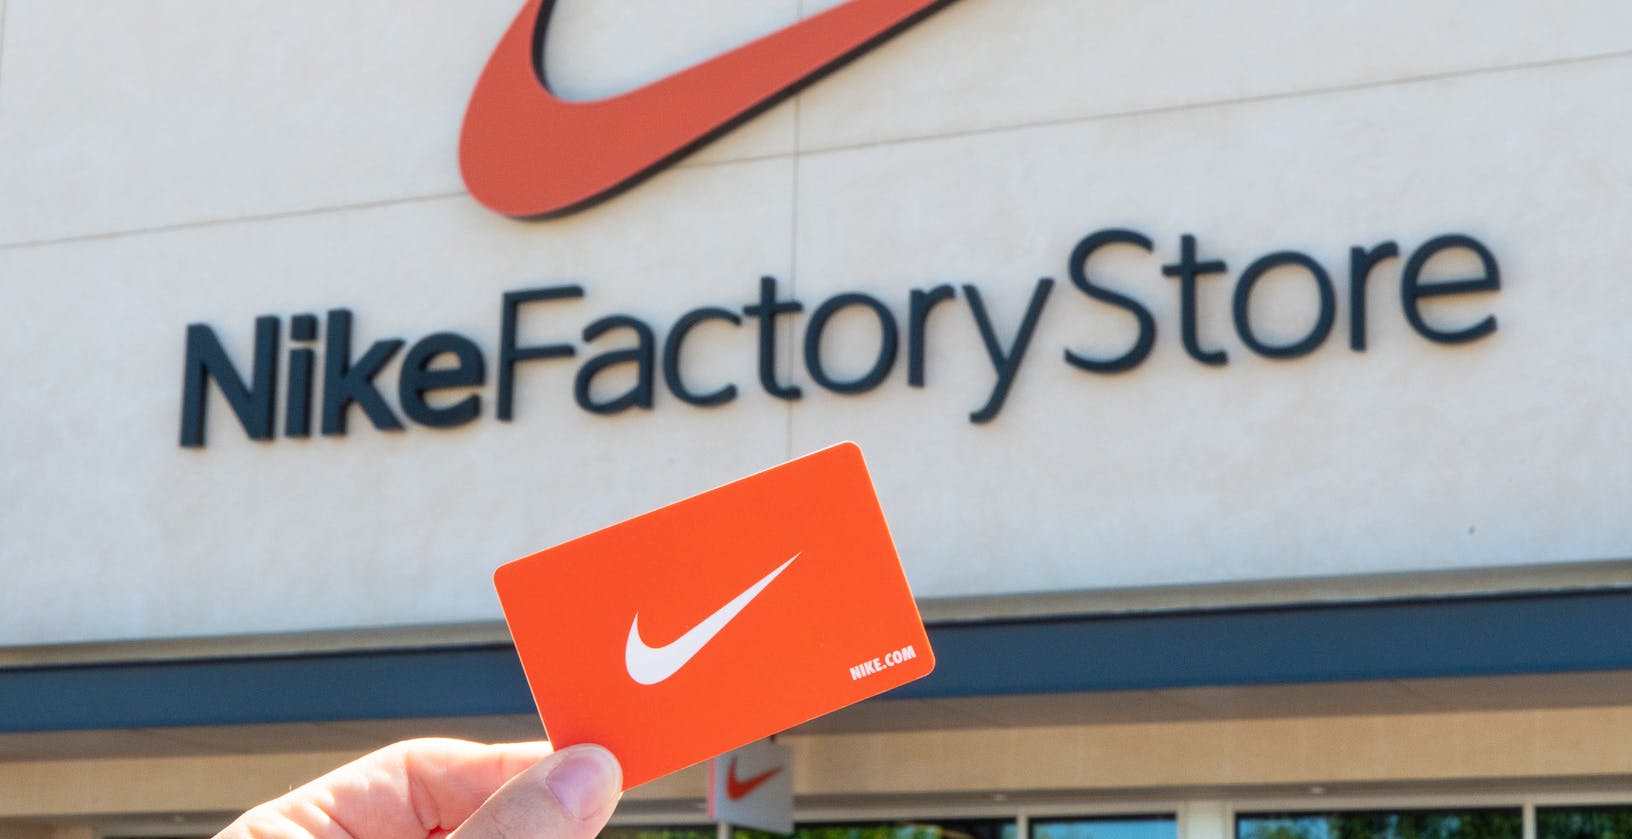 Nike Factory Outlet Tips to Help Save on Kicks - The Krazy Coupon Lady